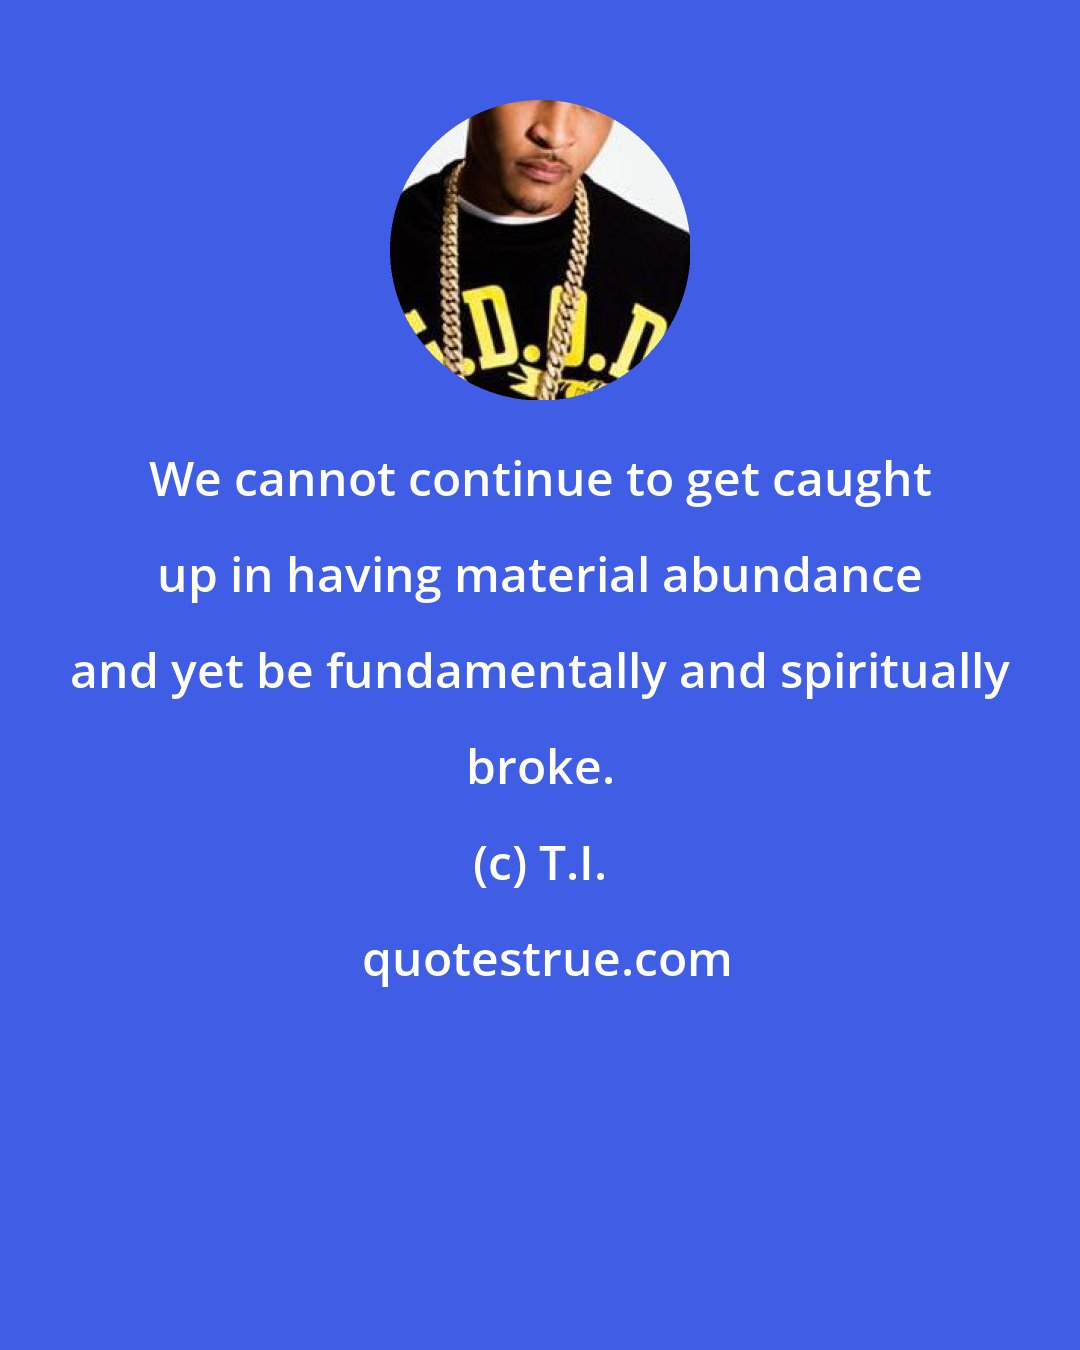 T.I.: We cannot continue to get caught up in having material abundance and yet be fundamentally and spiritually broke.